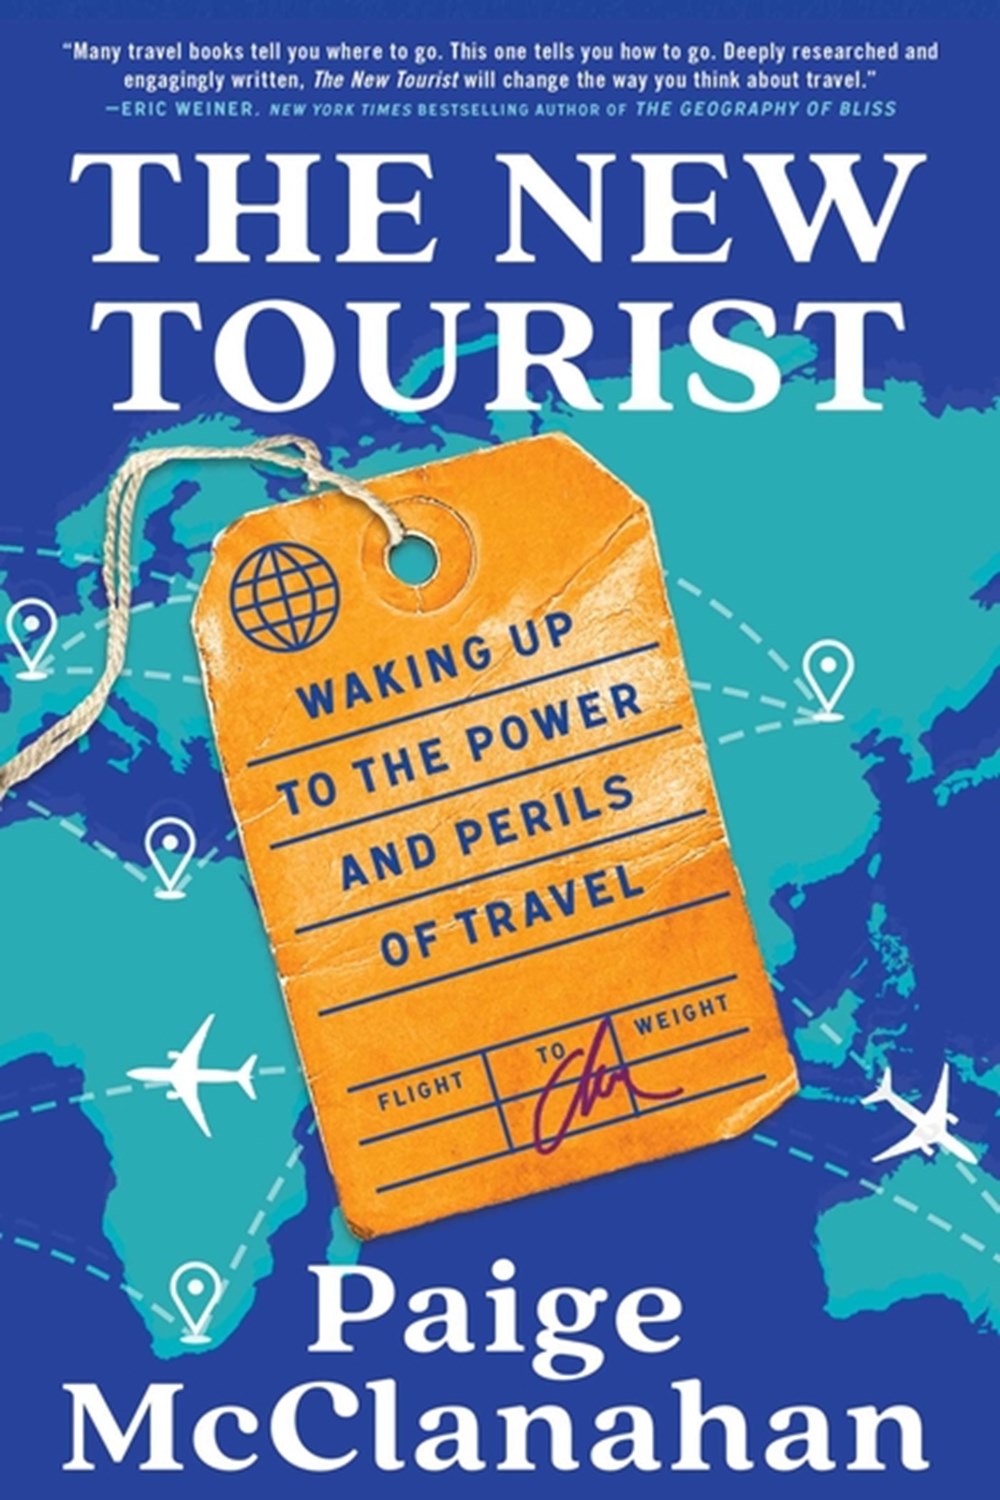 New Tourist: Waking Up to the Power and Perils of Travel